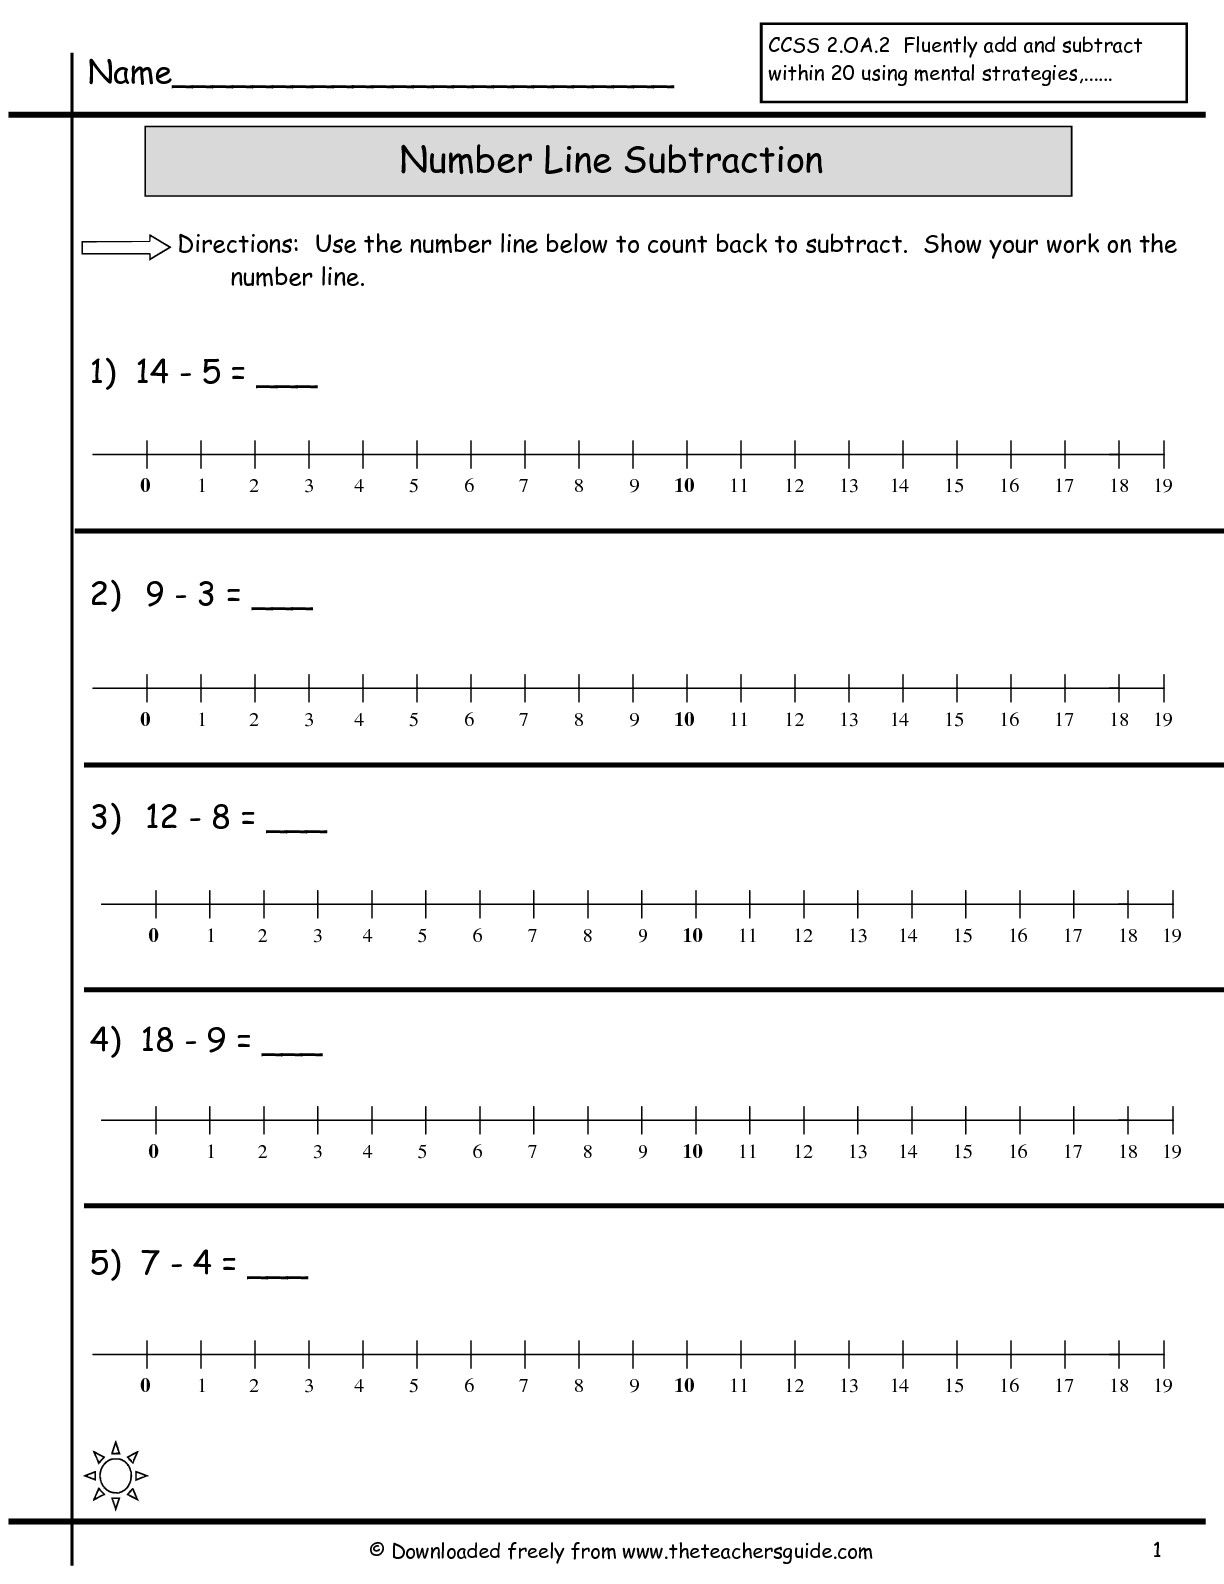 Subtraction Worksheet With Numberline | Free Math Worksheets